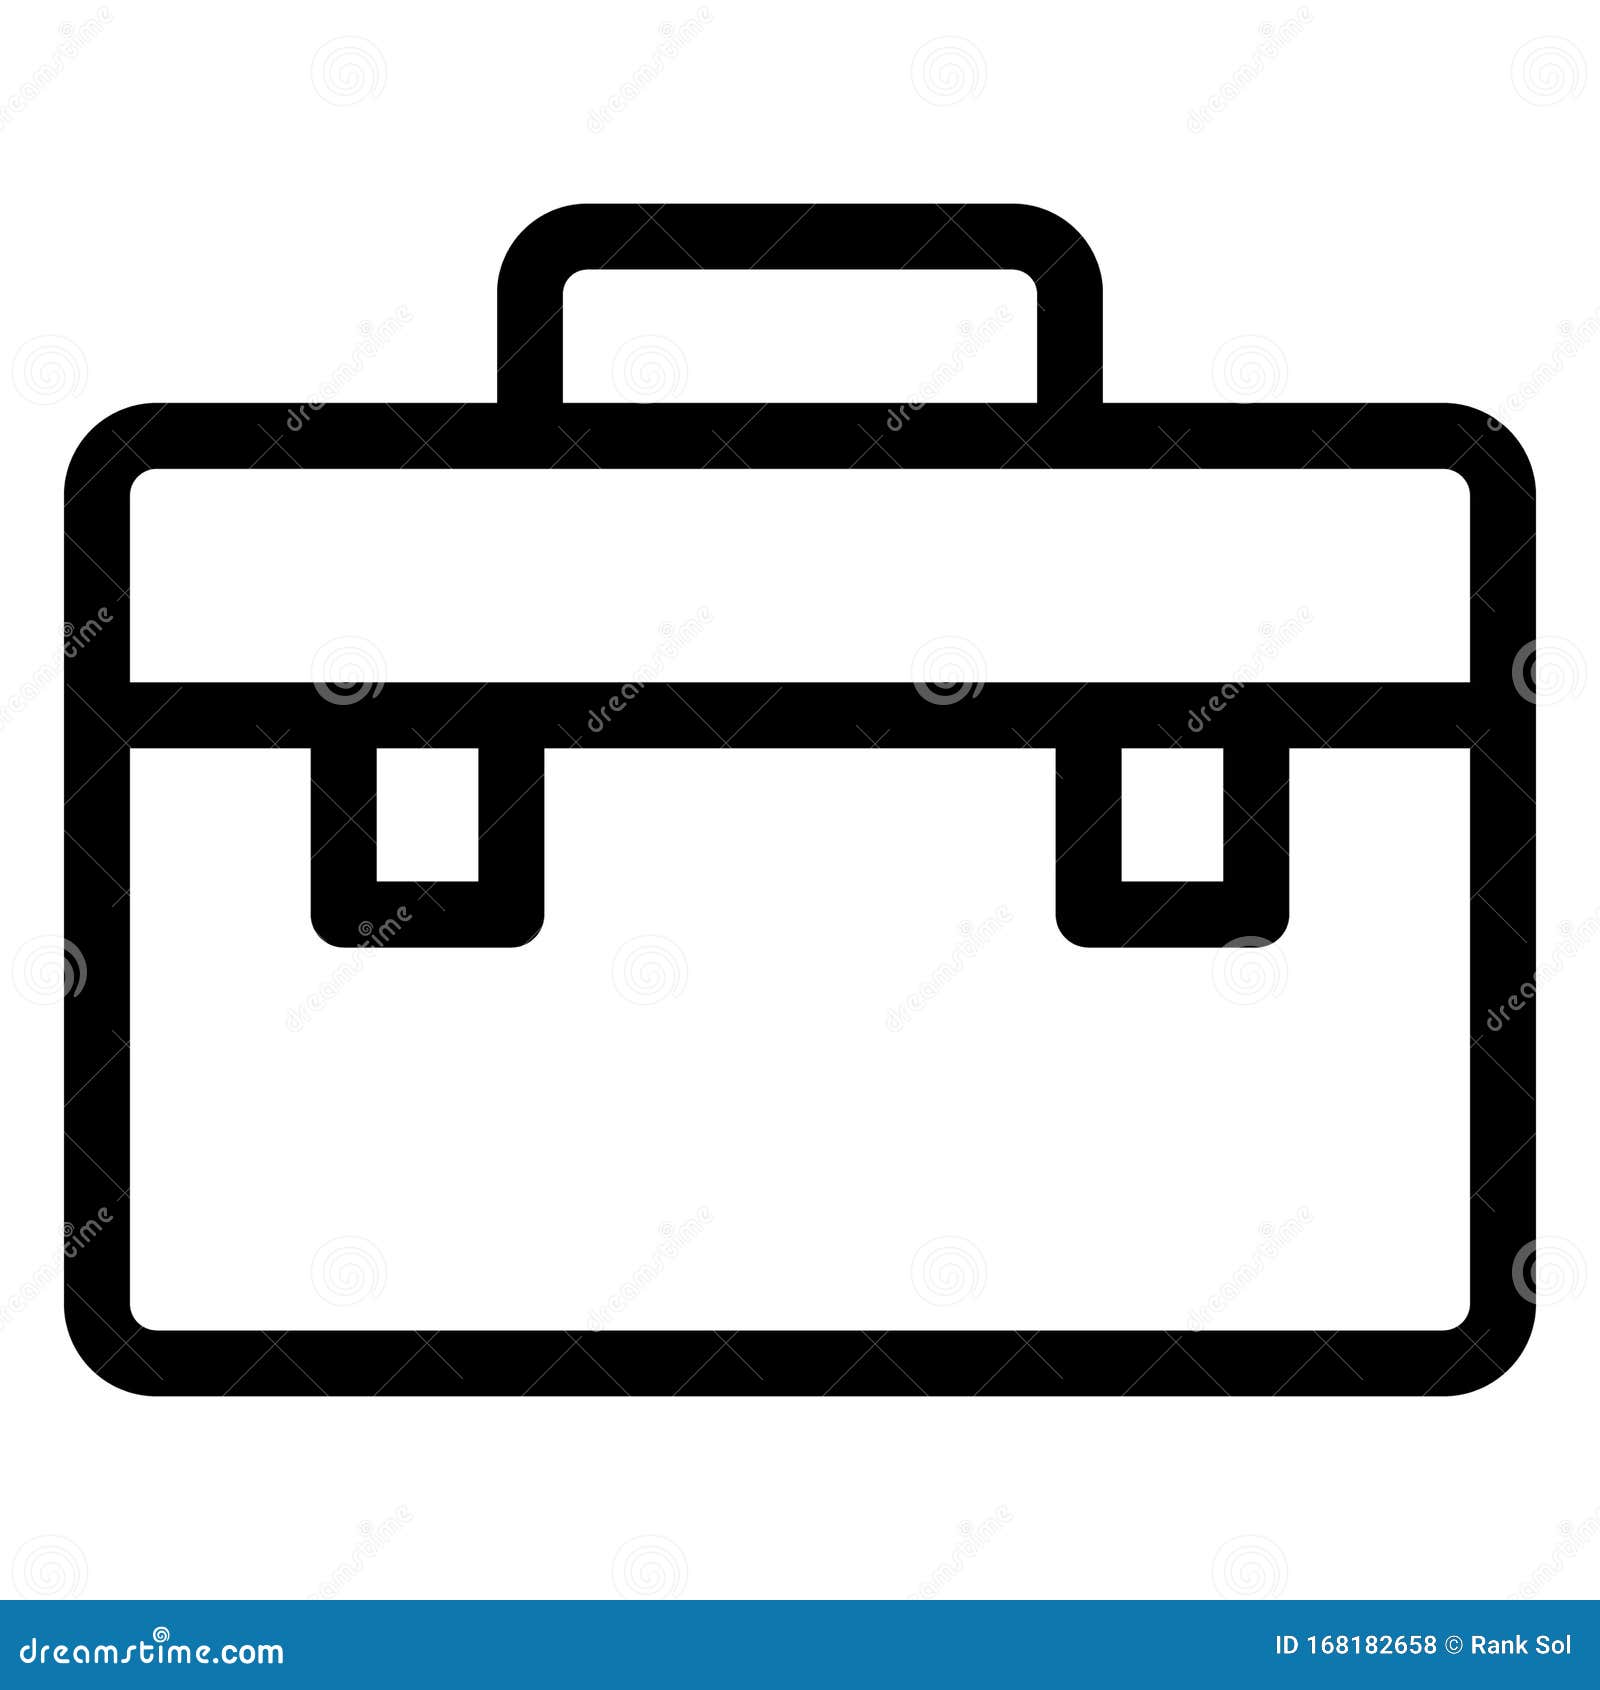 bag, bookbag   icon which can be easily modified or edited